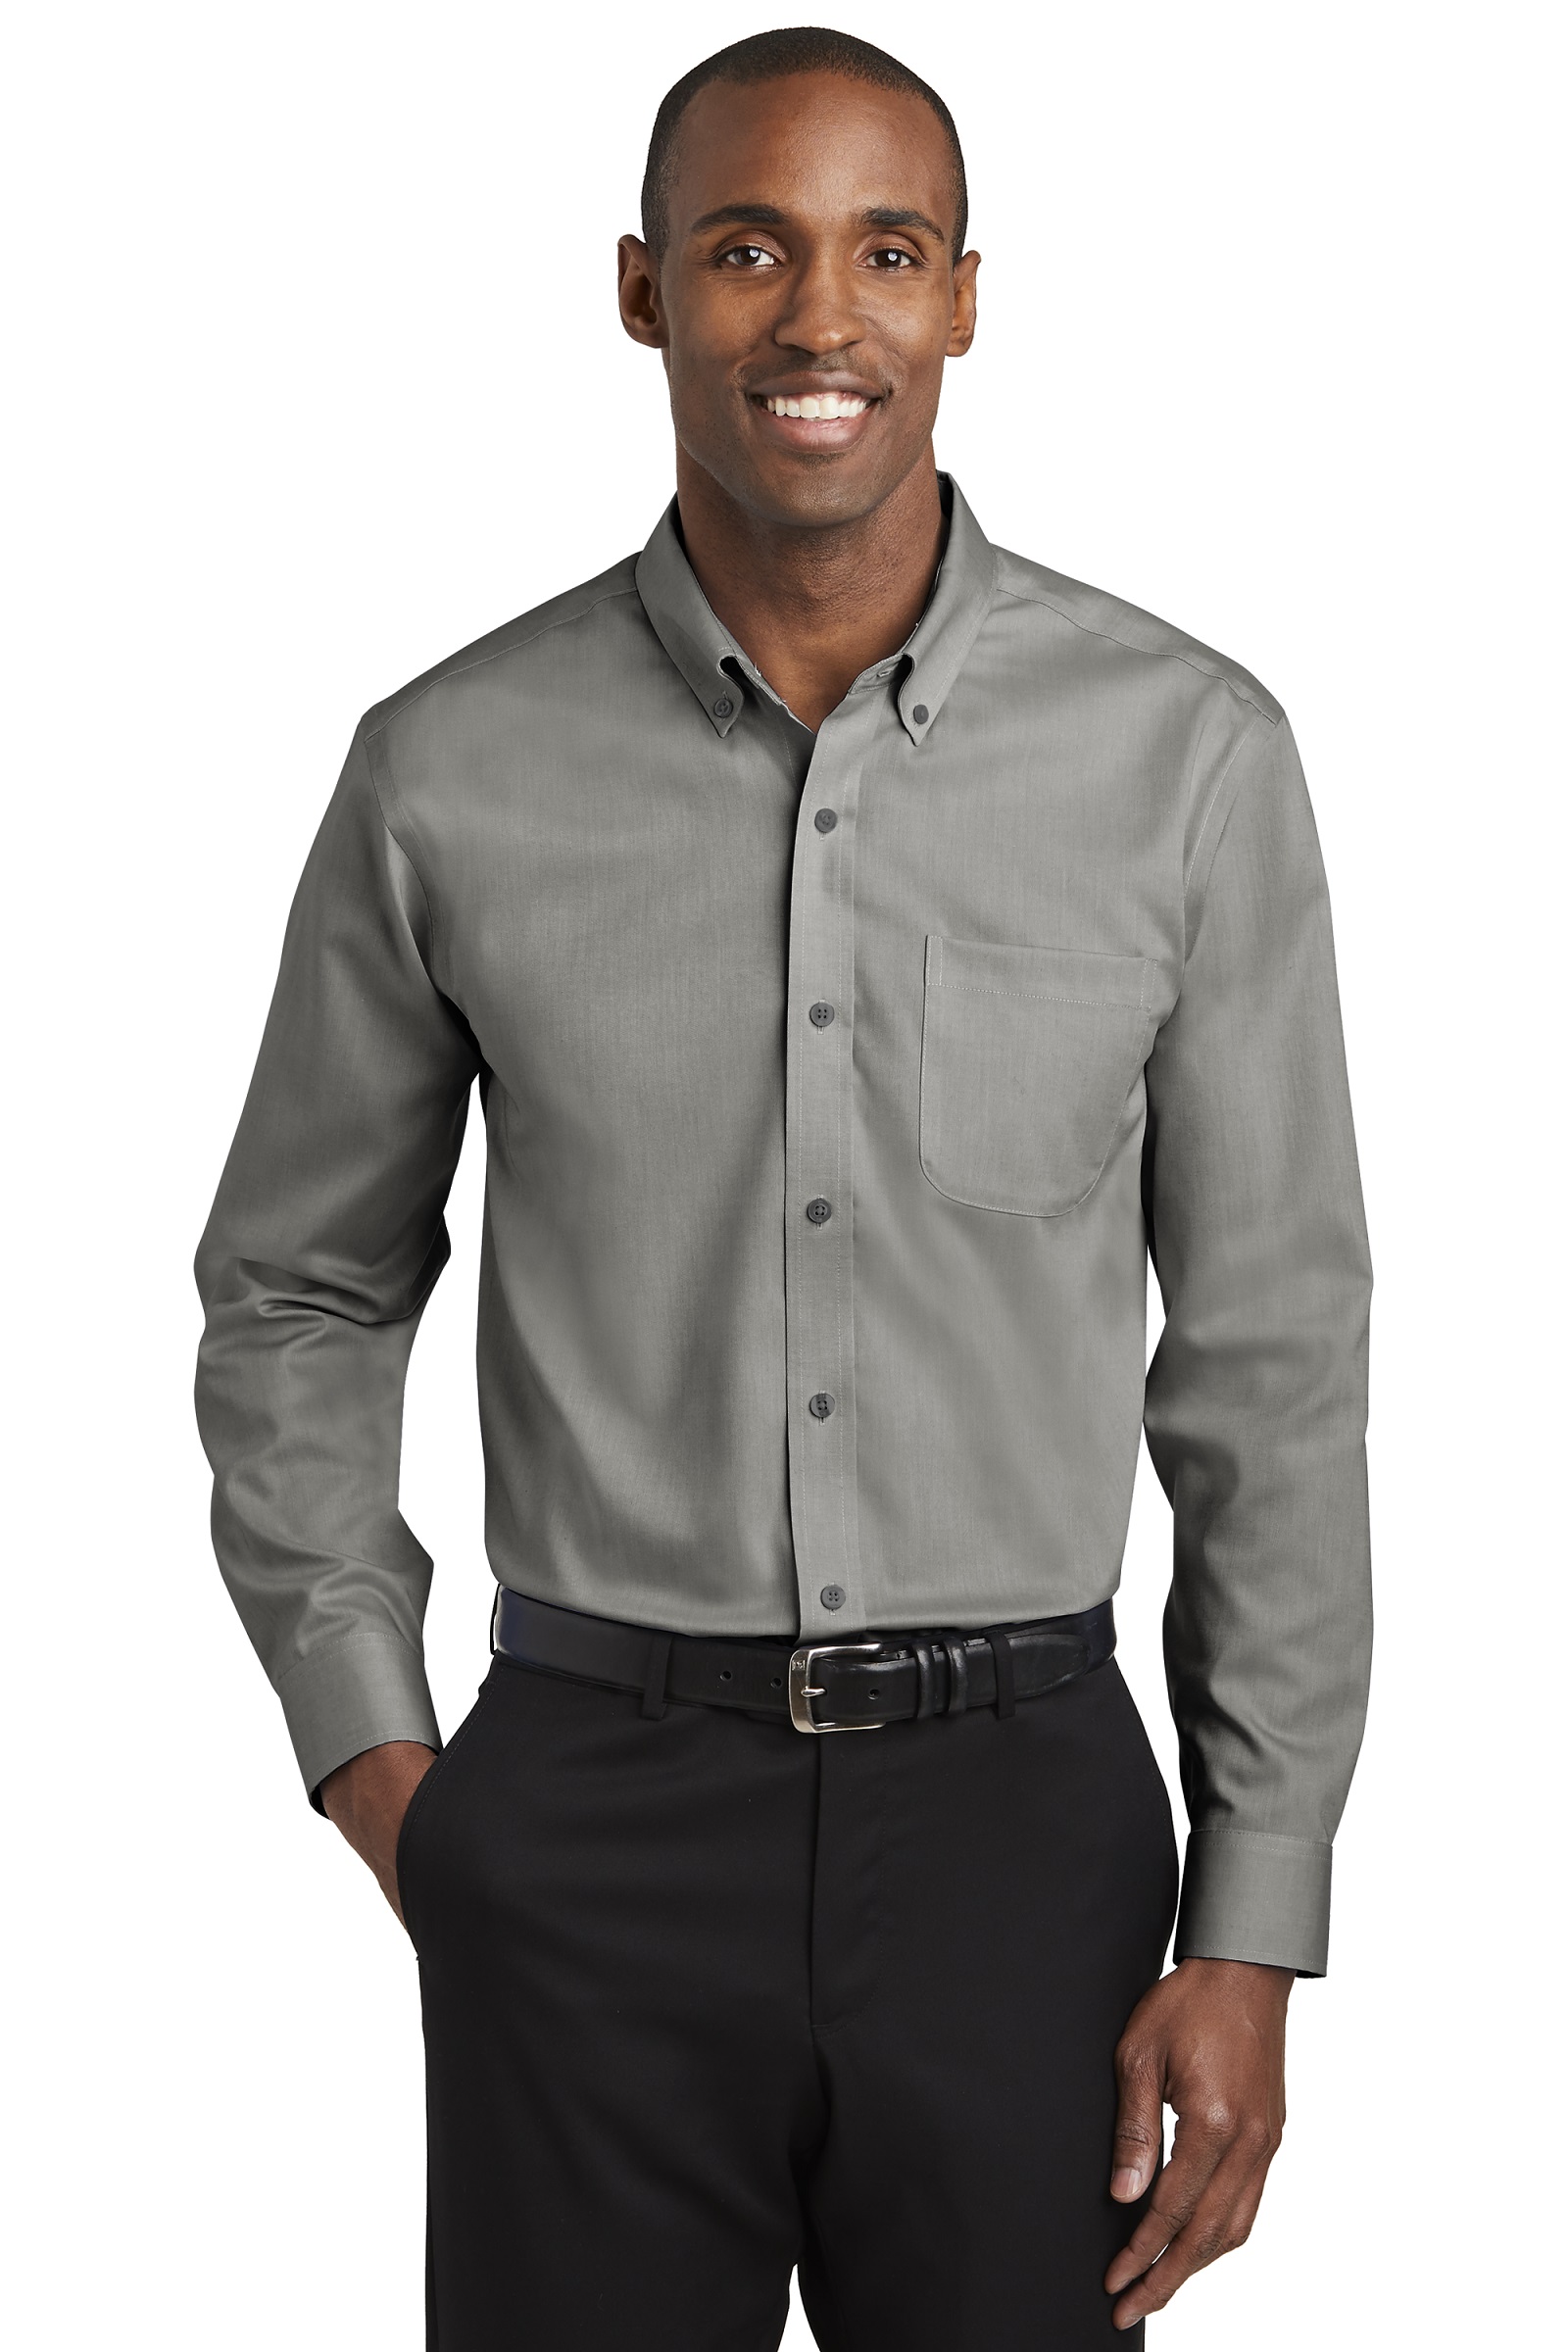 Red House Embroidered Men's Pinpoint Oxford Non-Iron Shirt